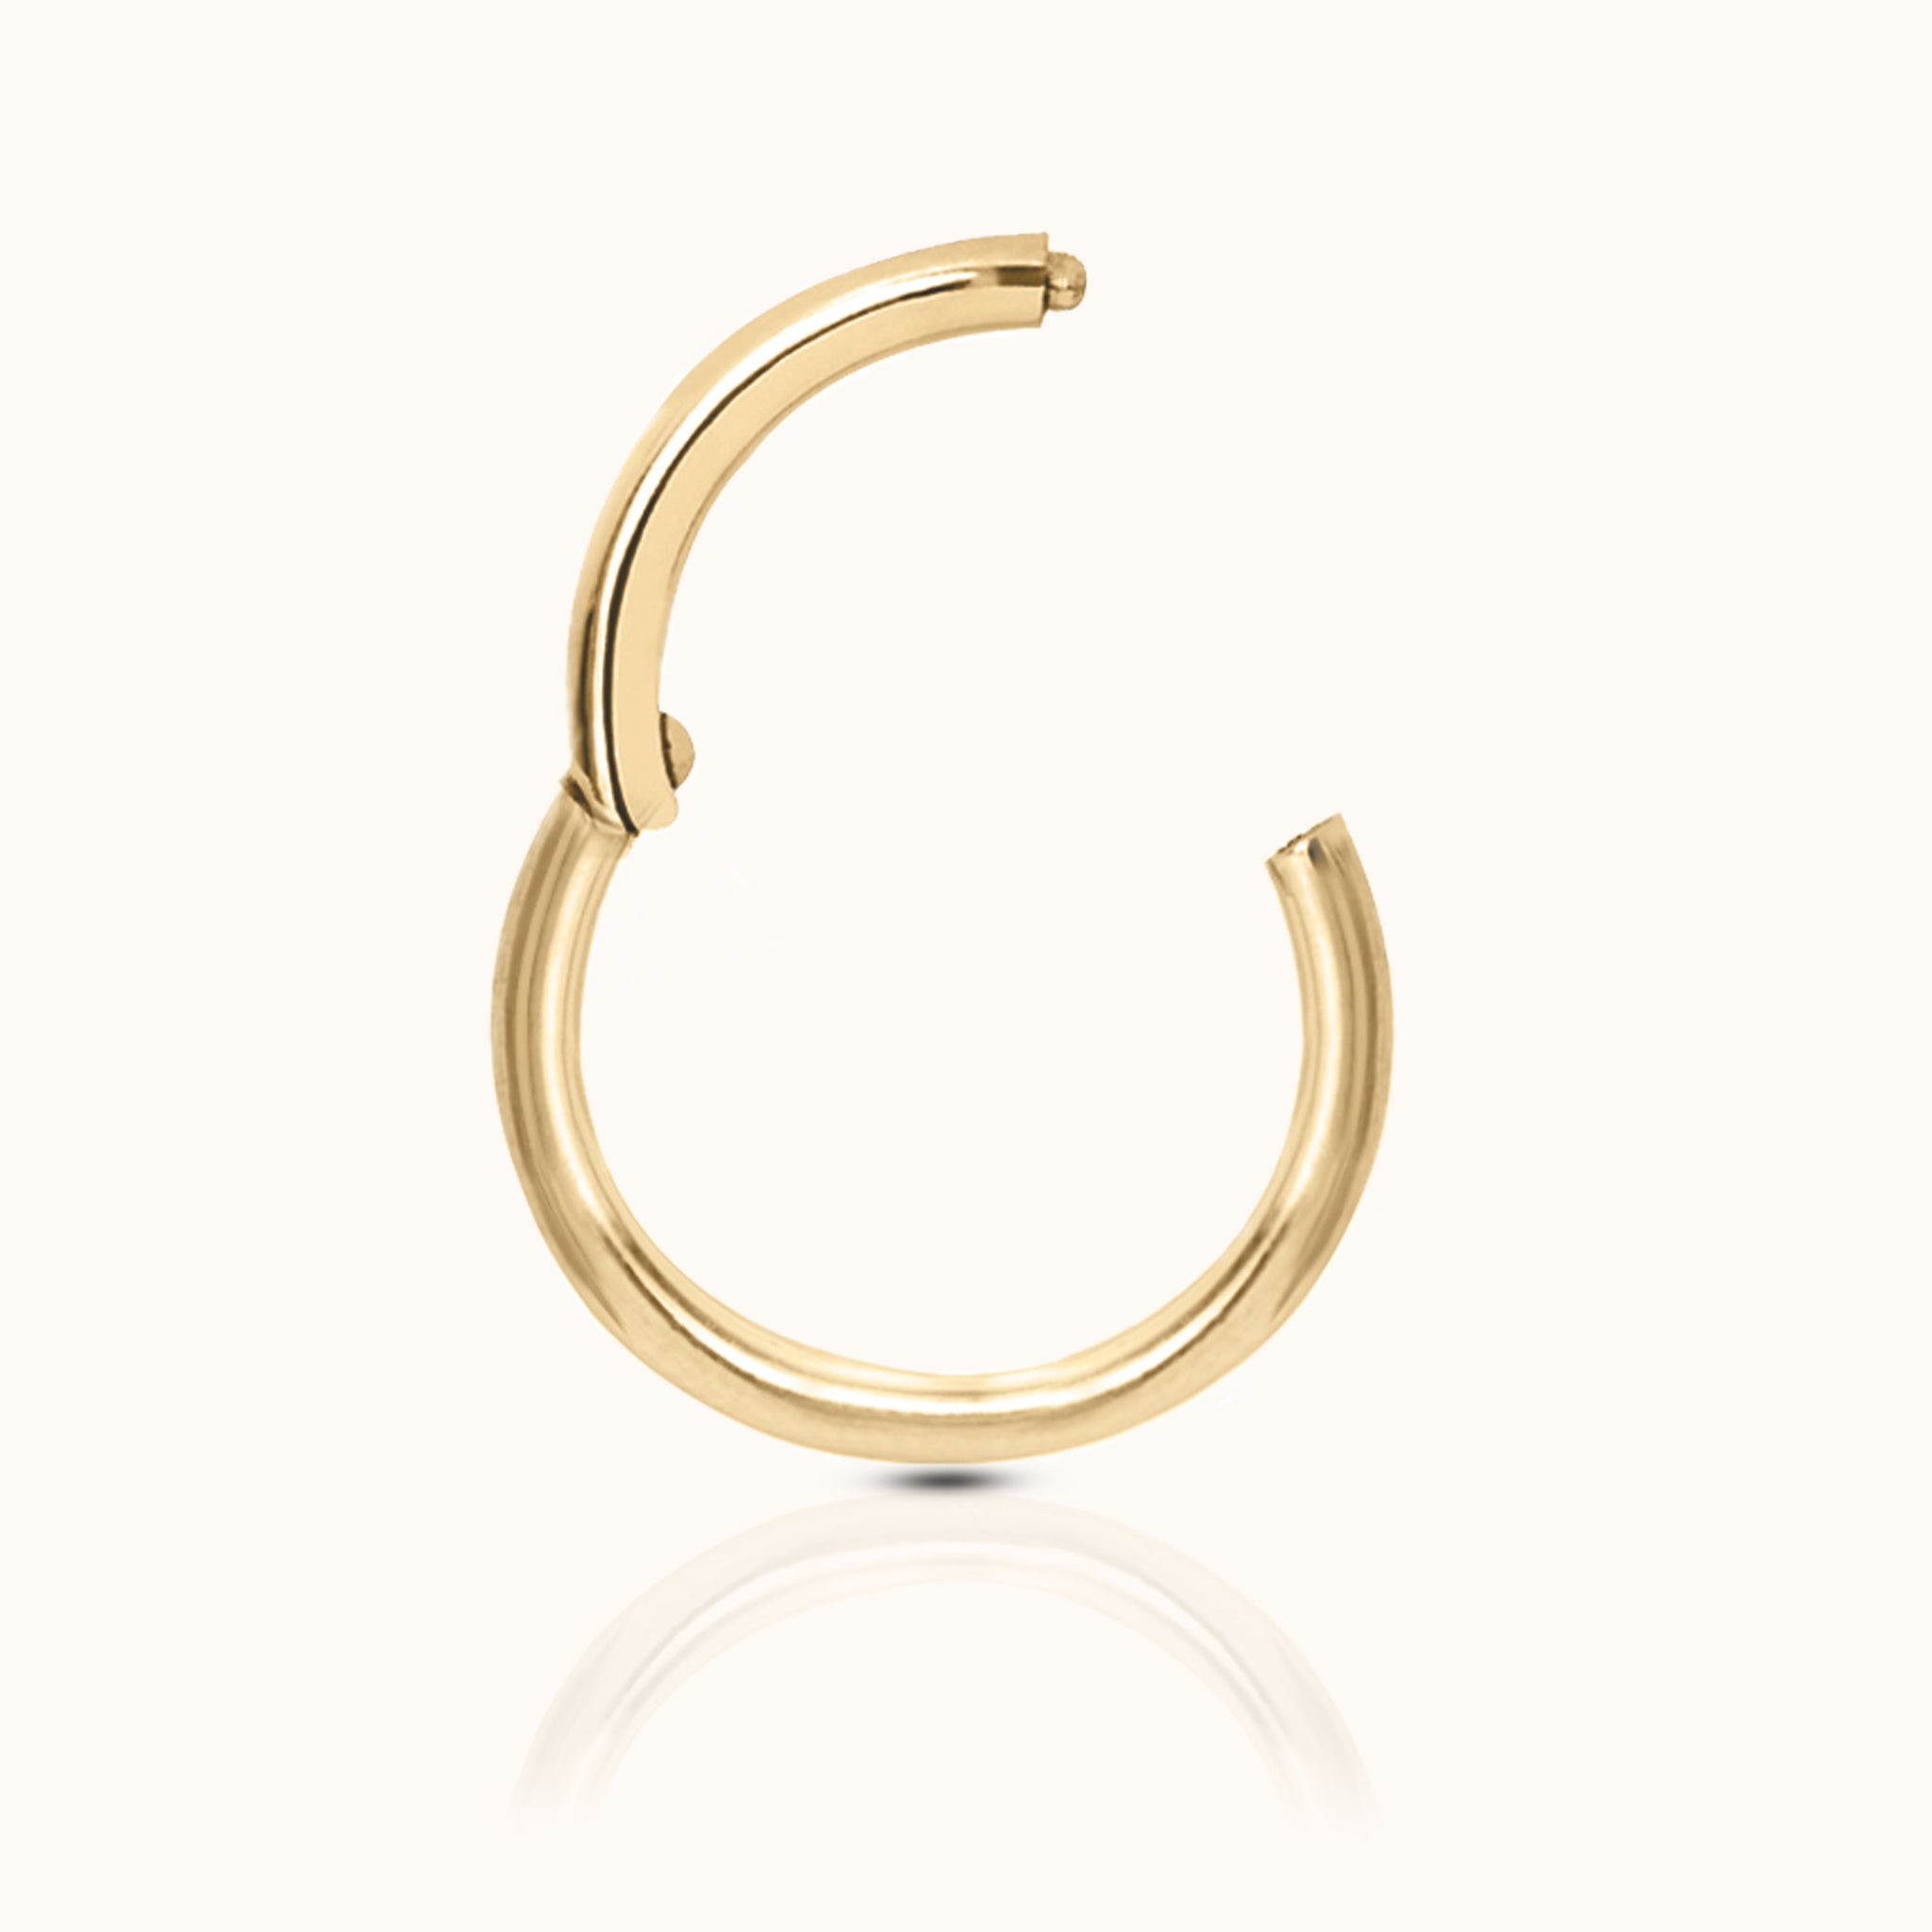 Classic Clicker 12mm Titanium PVD Gold Hinged Nap Hoop Earring by Doviana